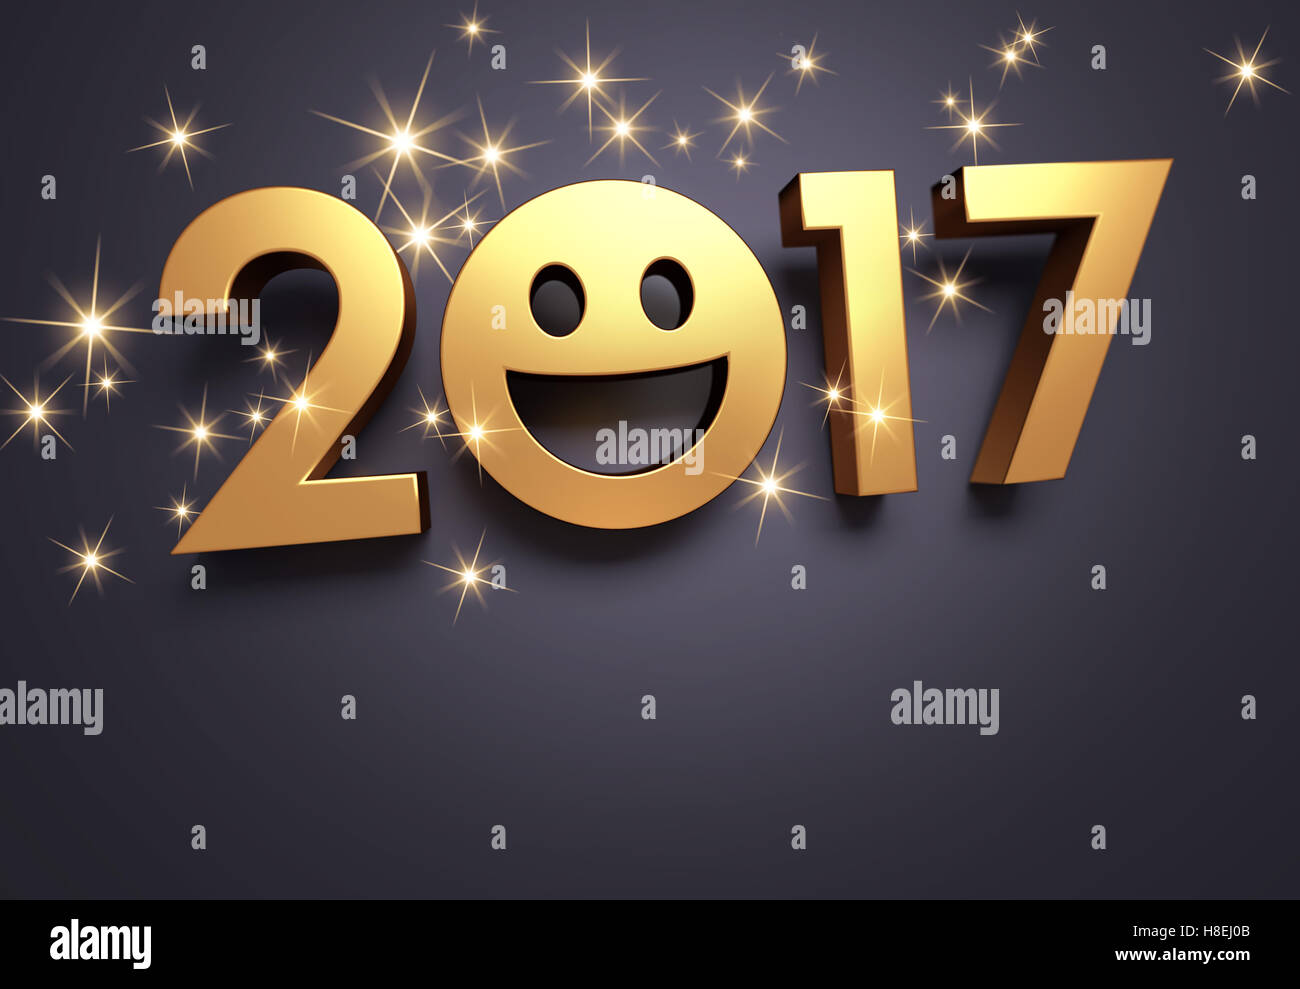 Gold 2017 New Year with a smiling face symbol, on a festive black background - 3D illustration Stock Photo